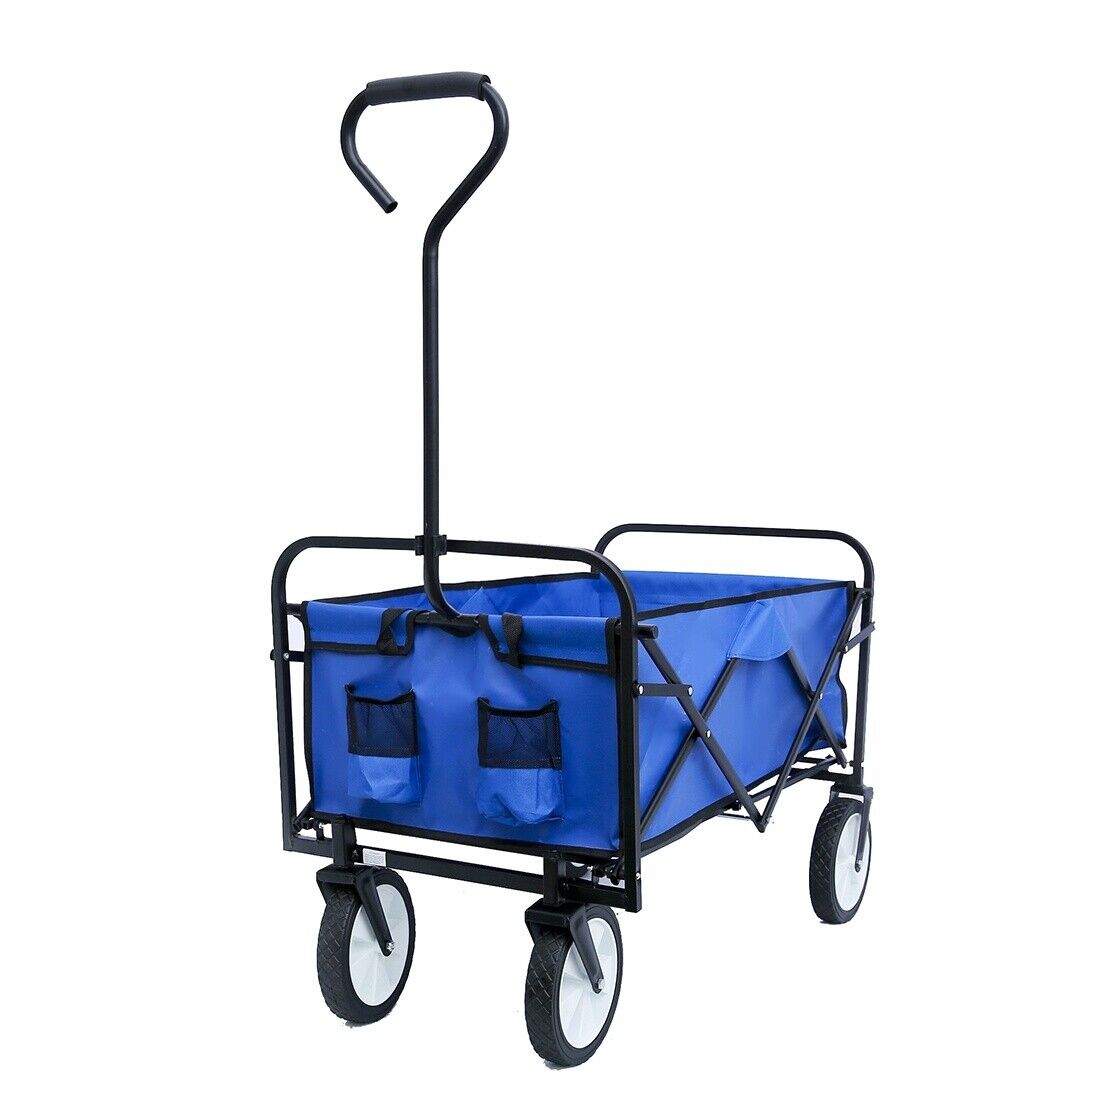 New 8inch Foldable Outdoor Multifunctional Shopping Cart Luggage Trolley Blue